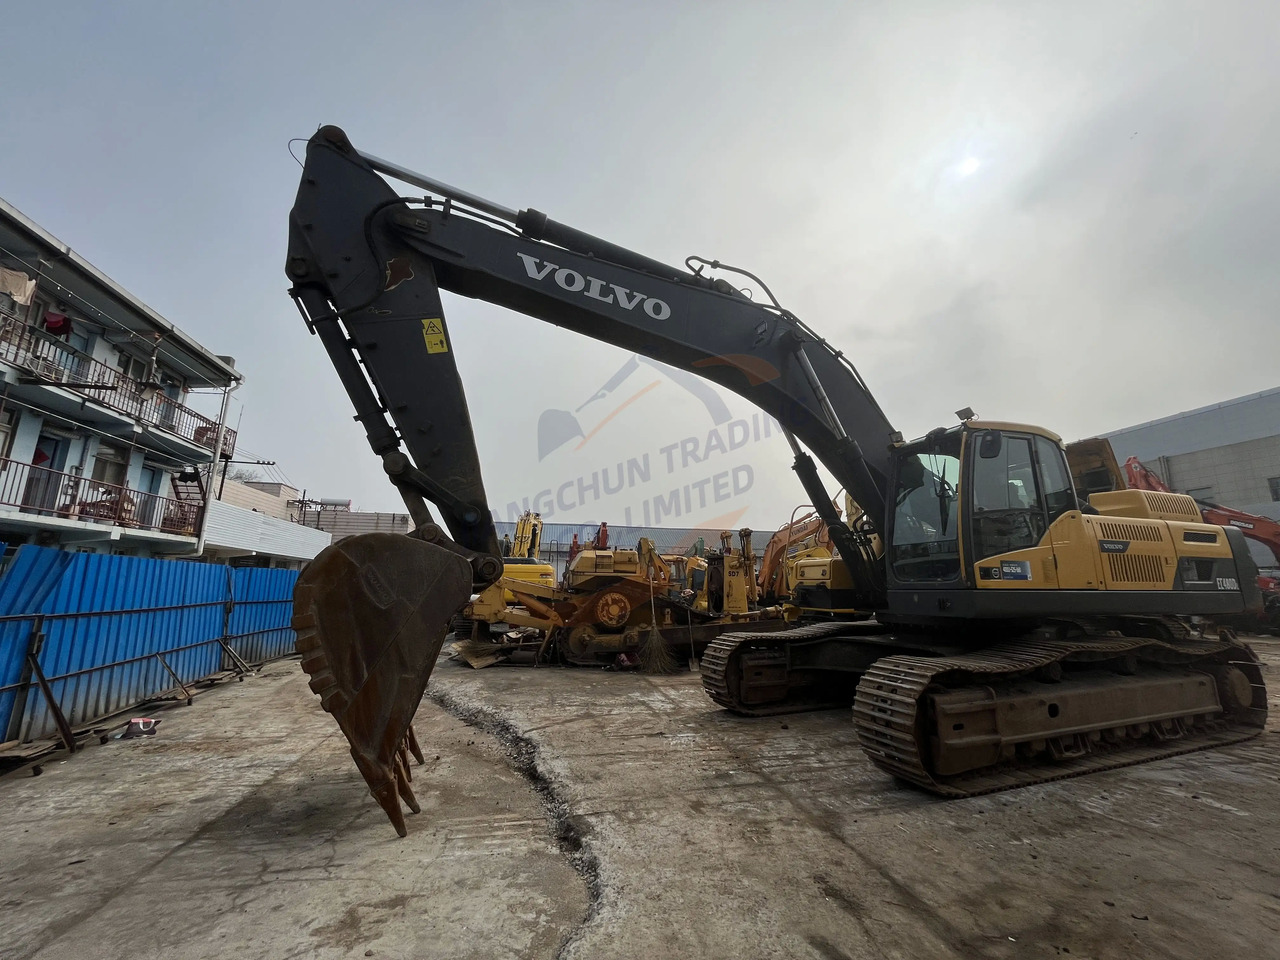 Kettenbagger New arrival second hand  hot selling Excavator construction machinery parts used excavator used  Volvo EC480D  in stock for sale: das Bild 5